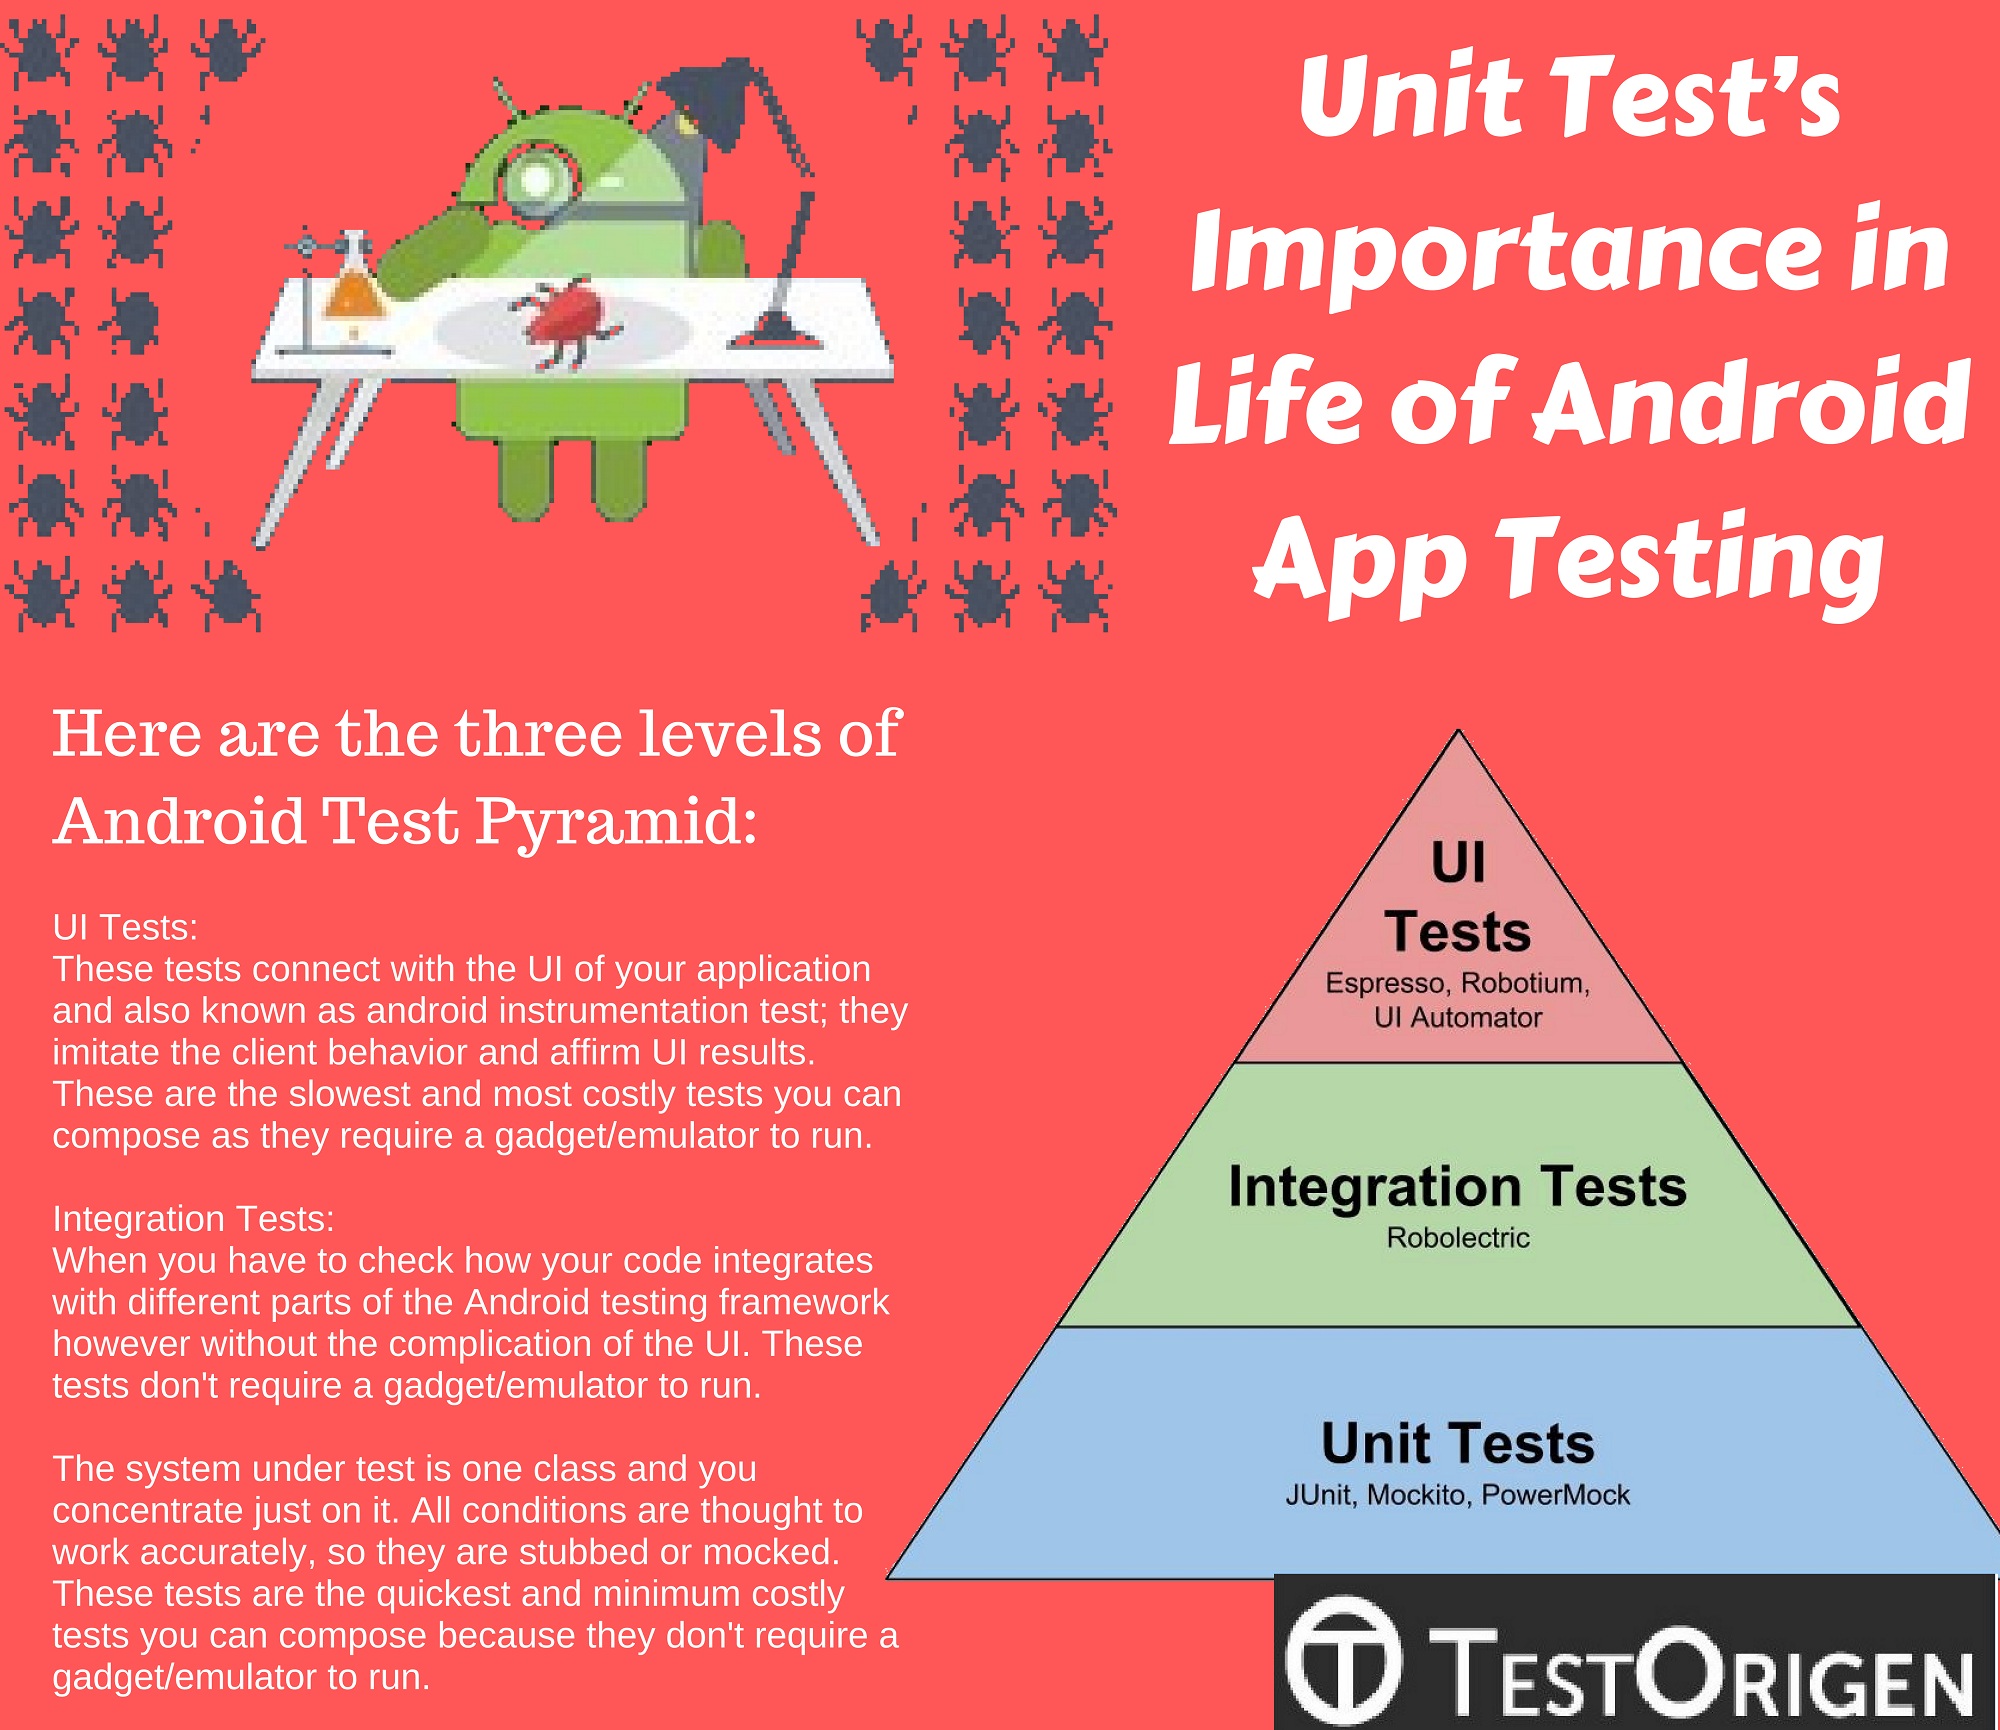 Unit Test’s Importance in Life of Android App Testing